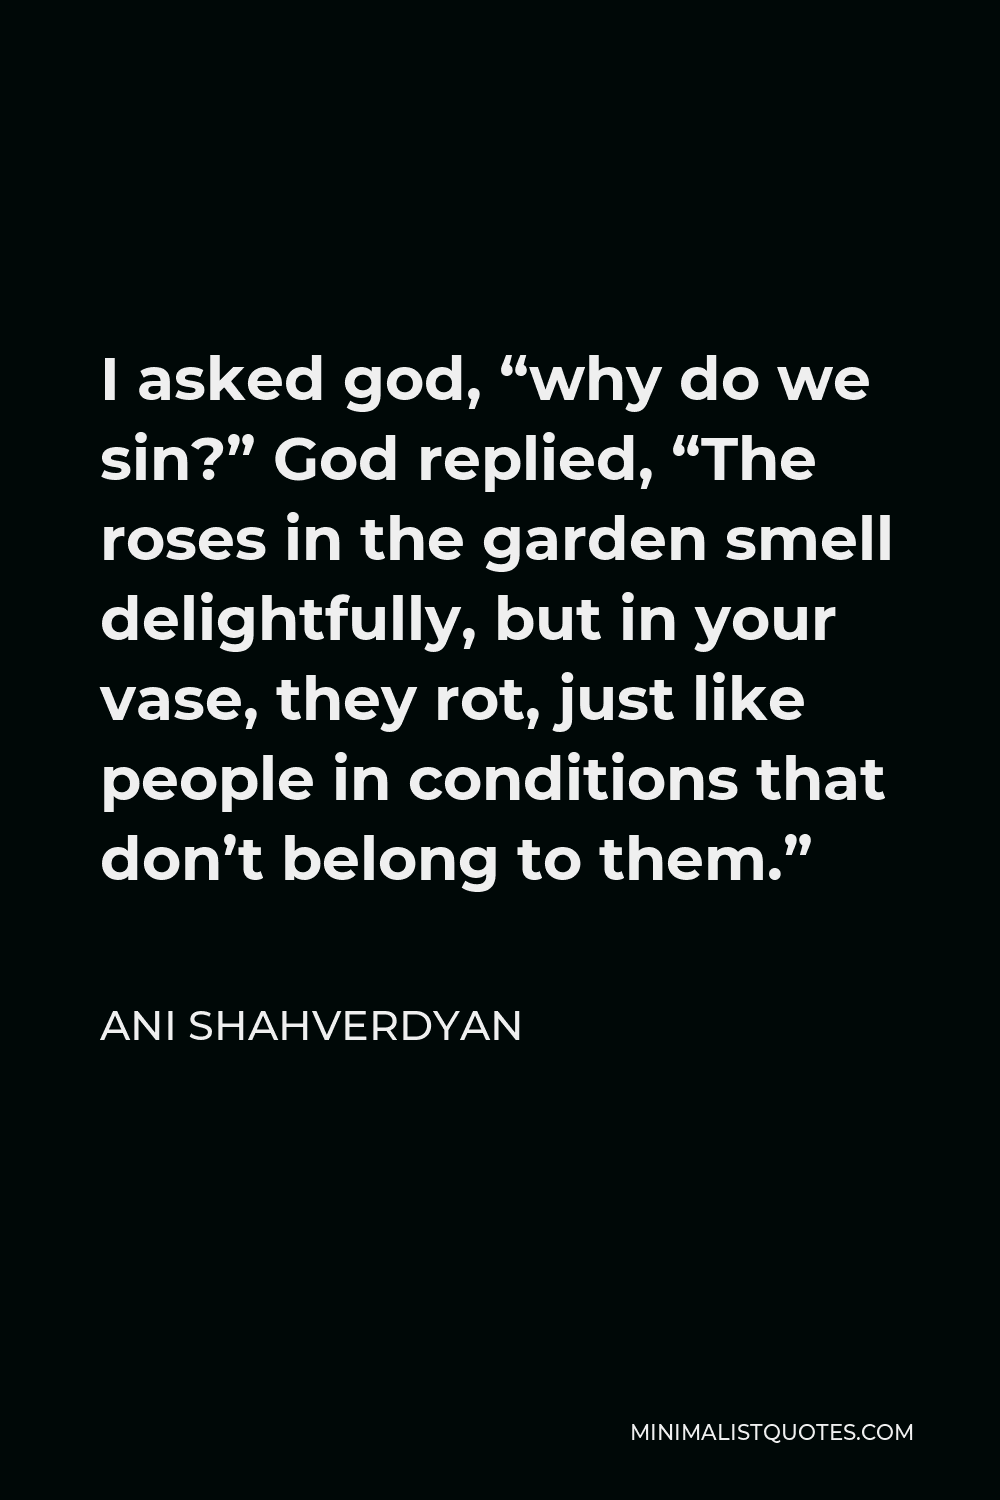 Ani Shahverdyan Quote - I asked god, “why do we sin?” God replied, “The roses in the garden smell delightfully, but in your vase, they rot, just like people in conditions that don’t belong to them.”